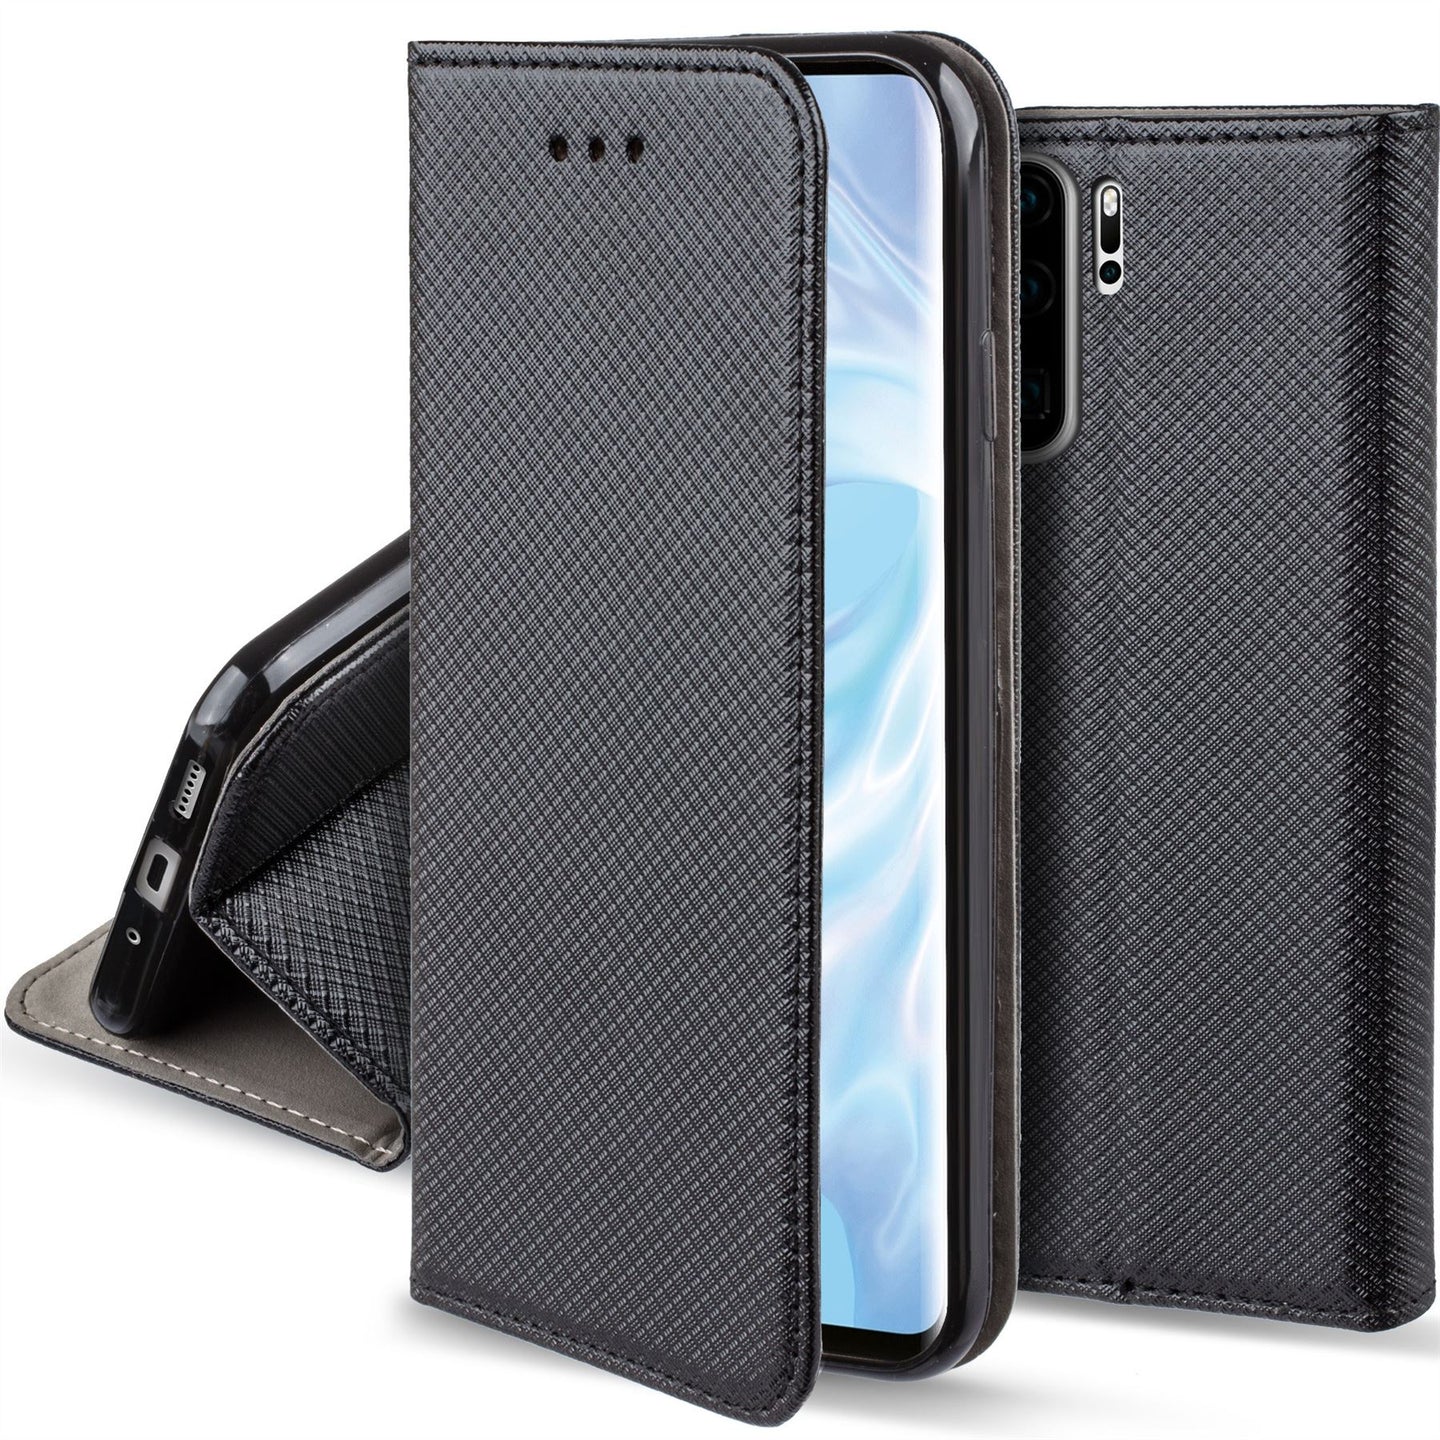 Moozy Case Flip Cover for Huawei P30 Pro, Black - Smart Magnetic Flip Case with Card Holder and Stand